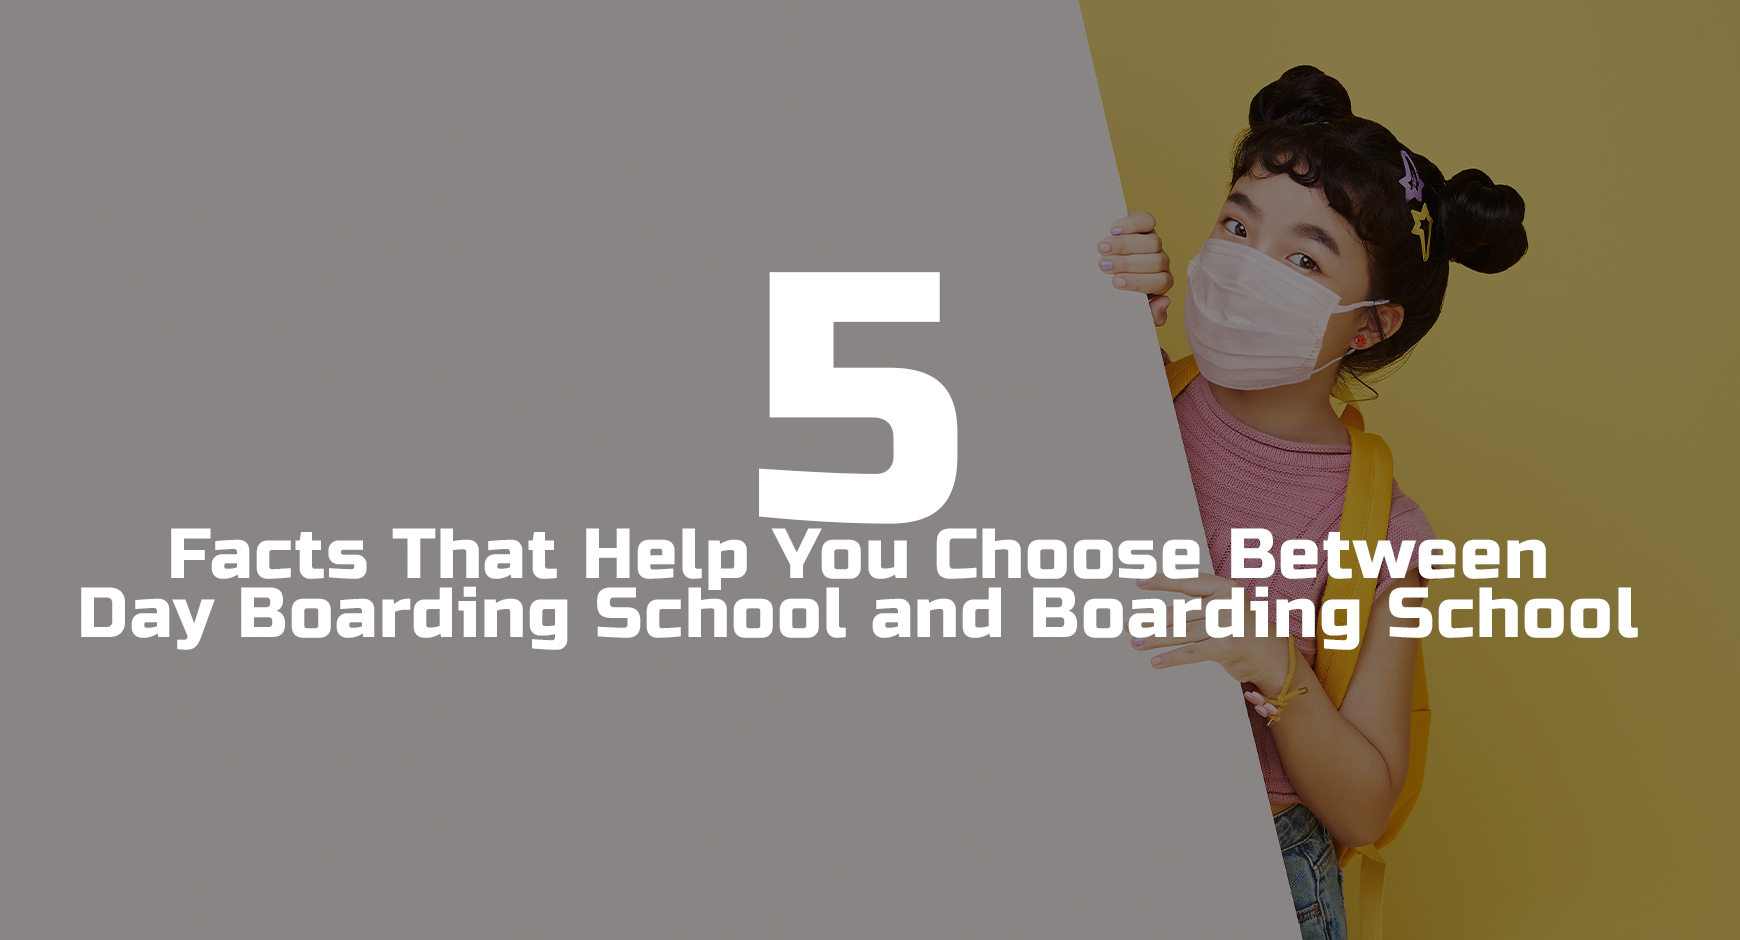  5 Facts That Help You Choose Between Day Boarding School and Boarding School